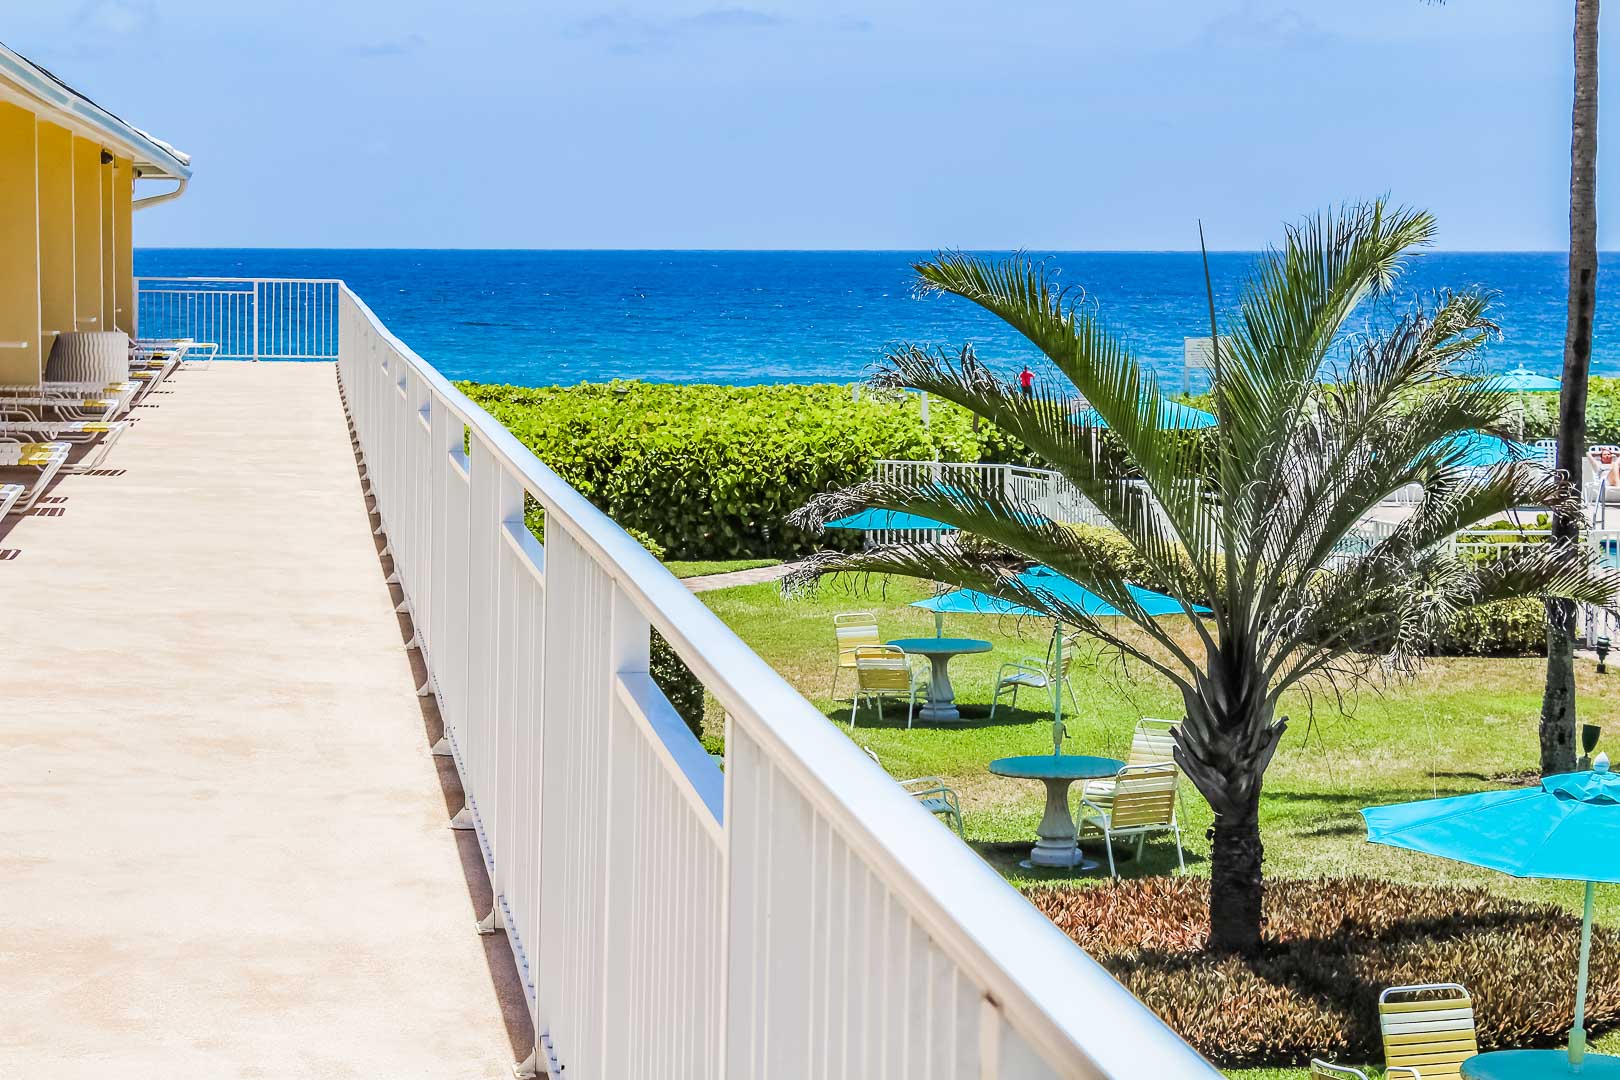 A scenic ocean view at VRI's Berkshire on the Ocean in Florida.